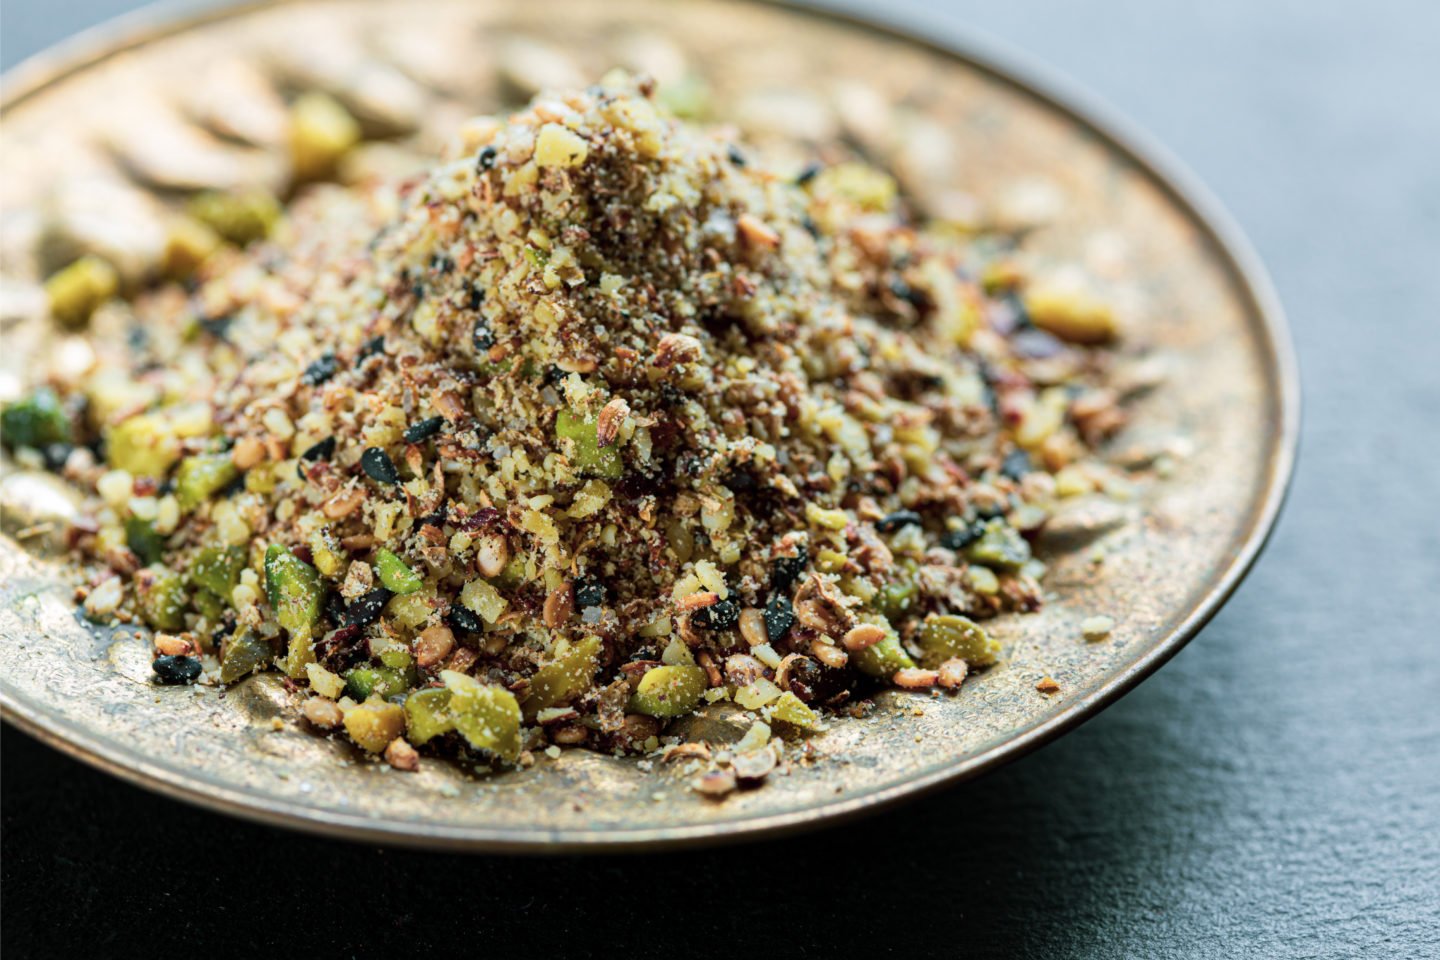 Dukkah Spice Blend Piled On Shallow Plate